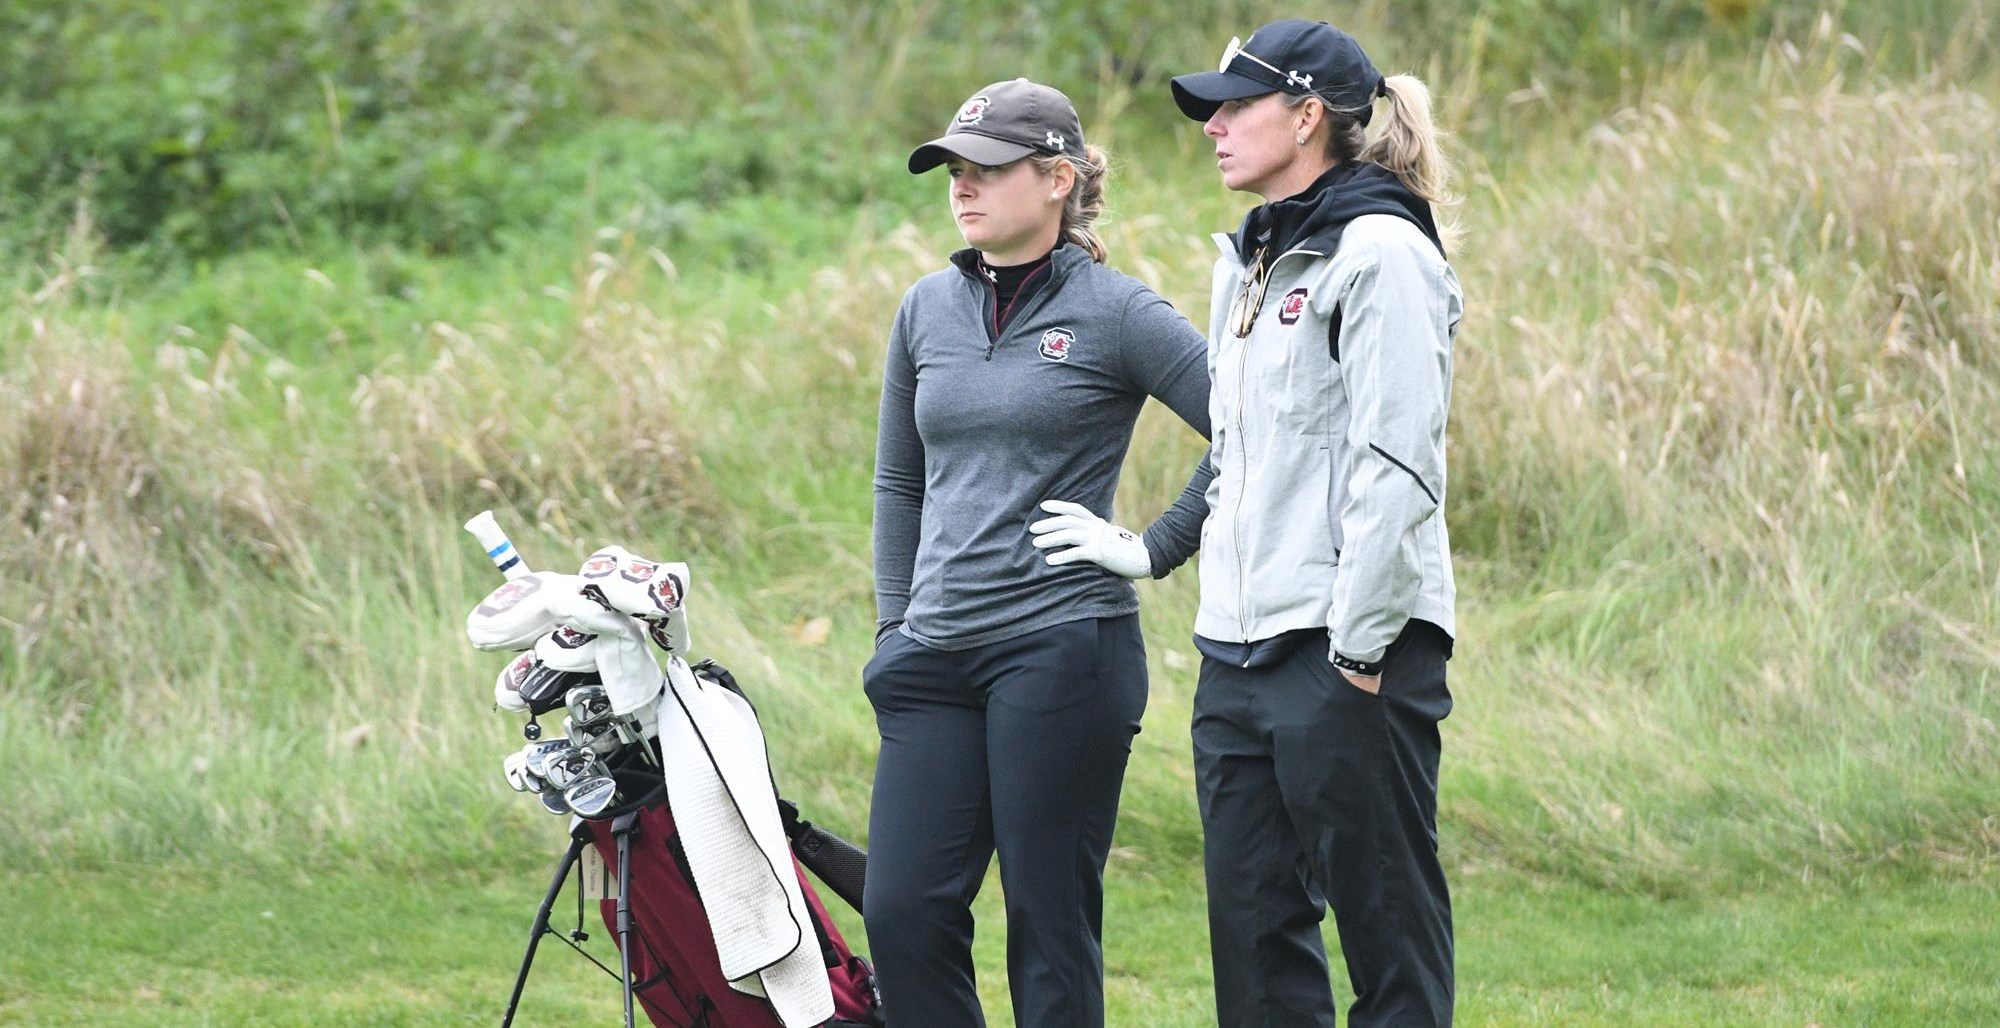 Gamecocks Lead by Six Heading Into Final Round at ANNIKA